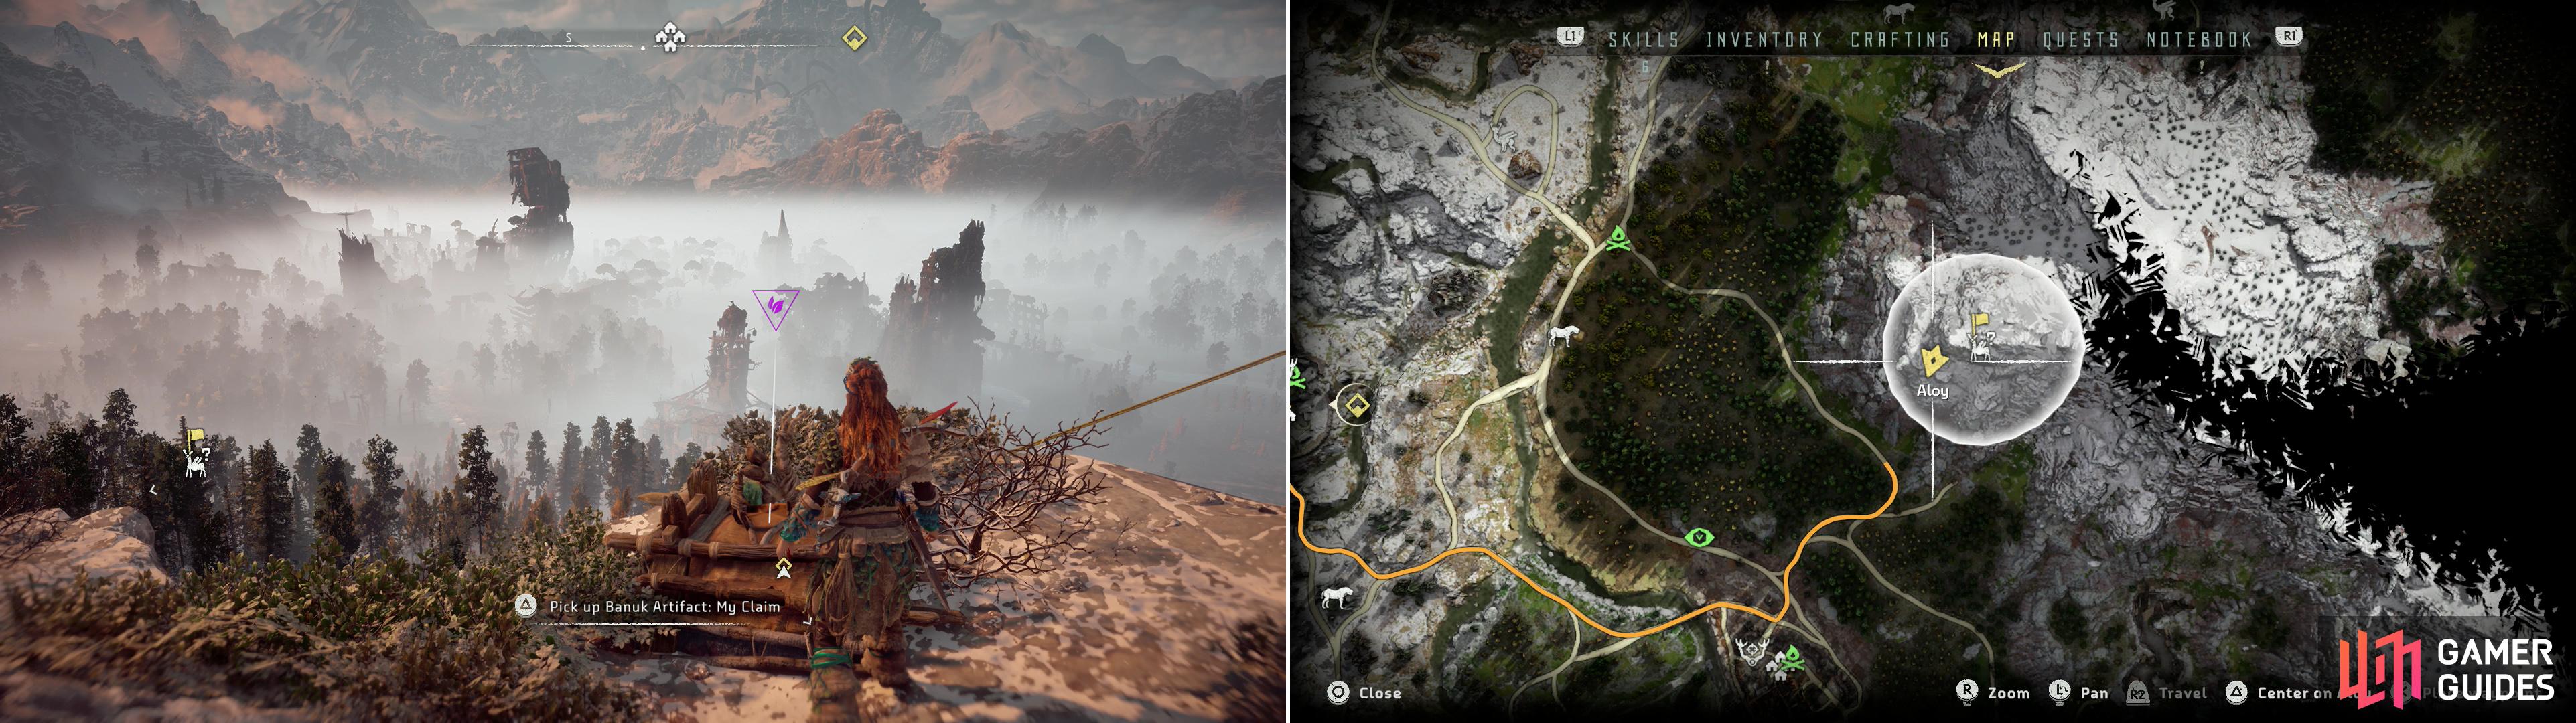 Climb a mountain along the northeastern reach of Devil’s Thirst to find the Banuk Artifact - My Claim (left) which be found at the location indicated on the map (right).